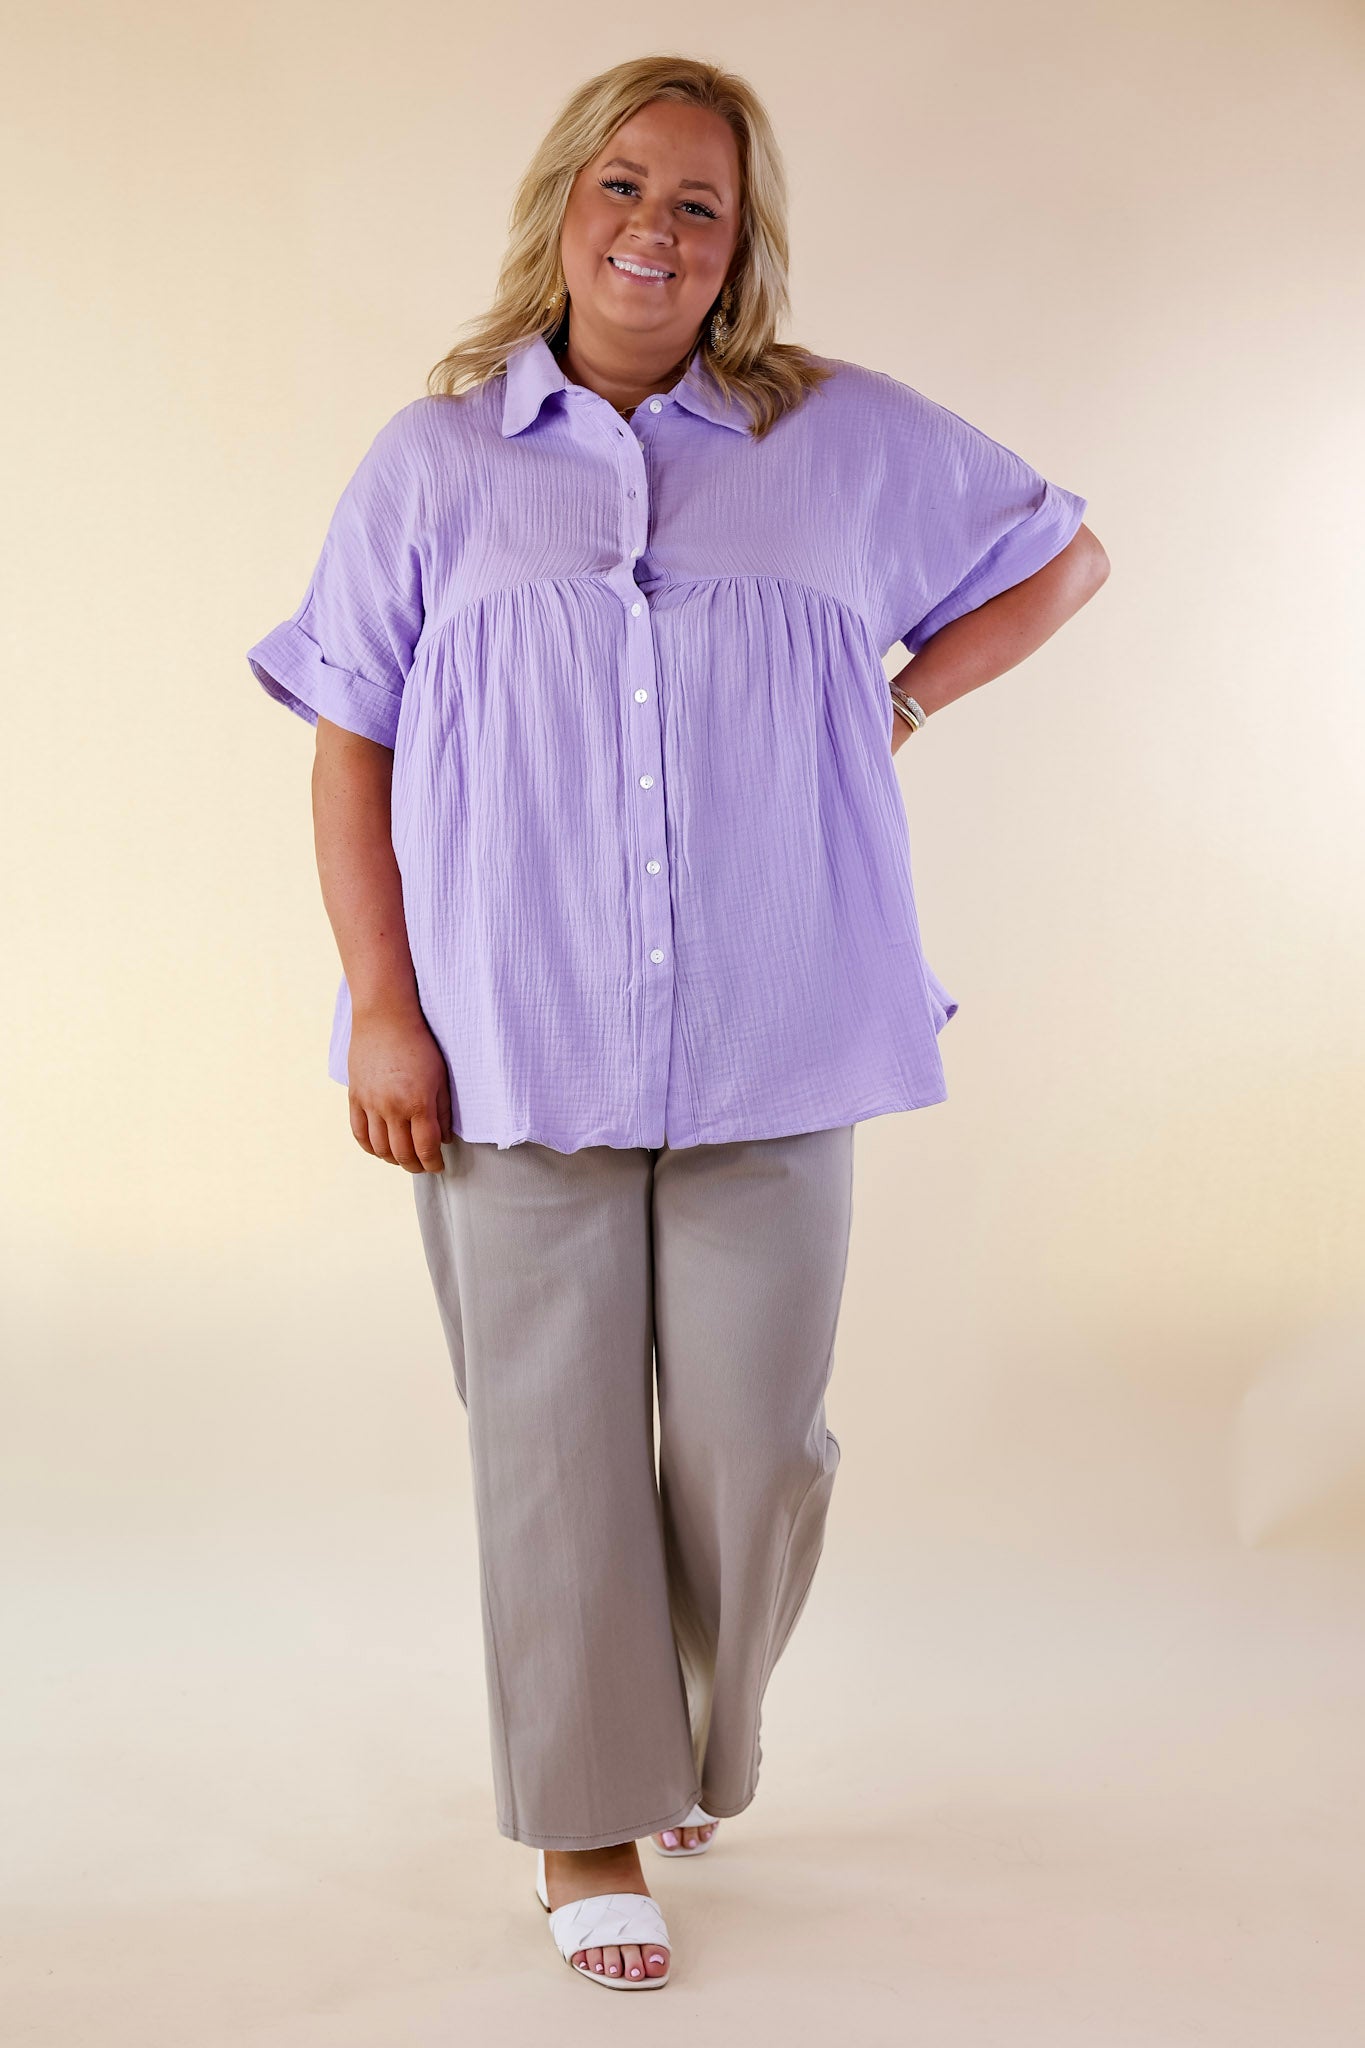 Vacation Vibes Collared Button Up Babydoll Top in Lavender Purple - Giddy Up Glamour Boutique